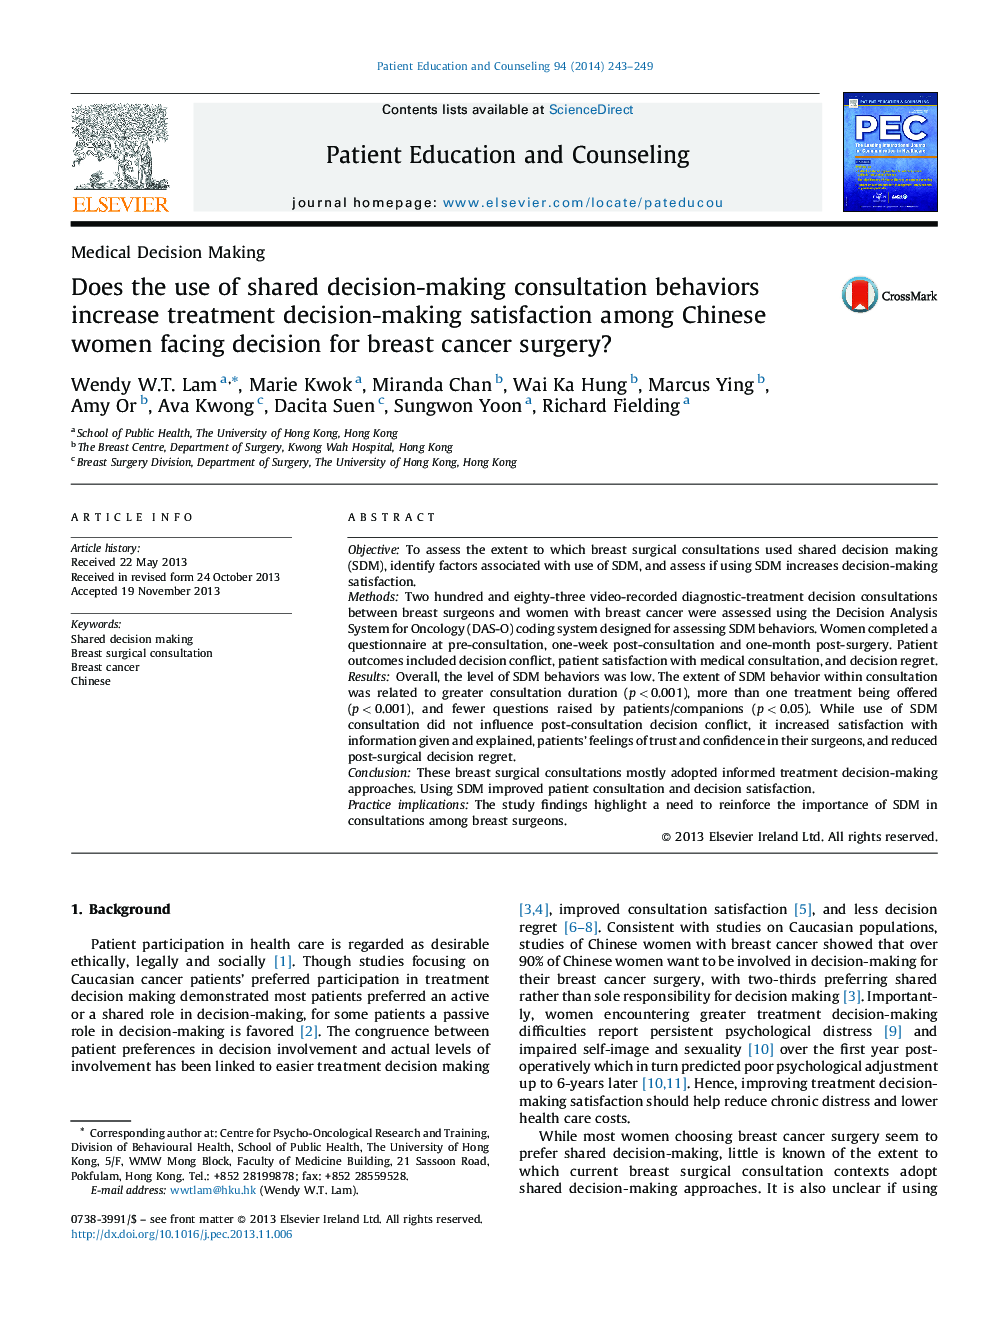 Does the use of shared decision-making consultation behaviors increase treatment decision-making satisfaction among Chinese women facing decision for breast cancer surgery?